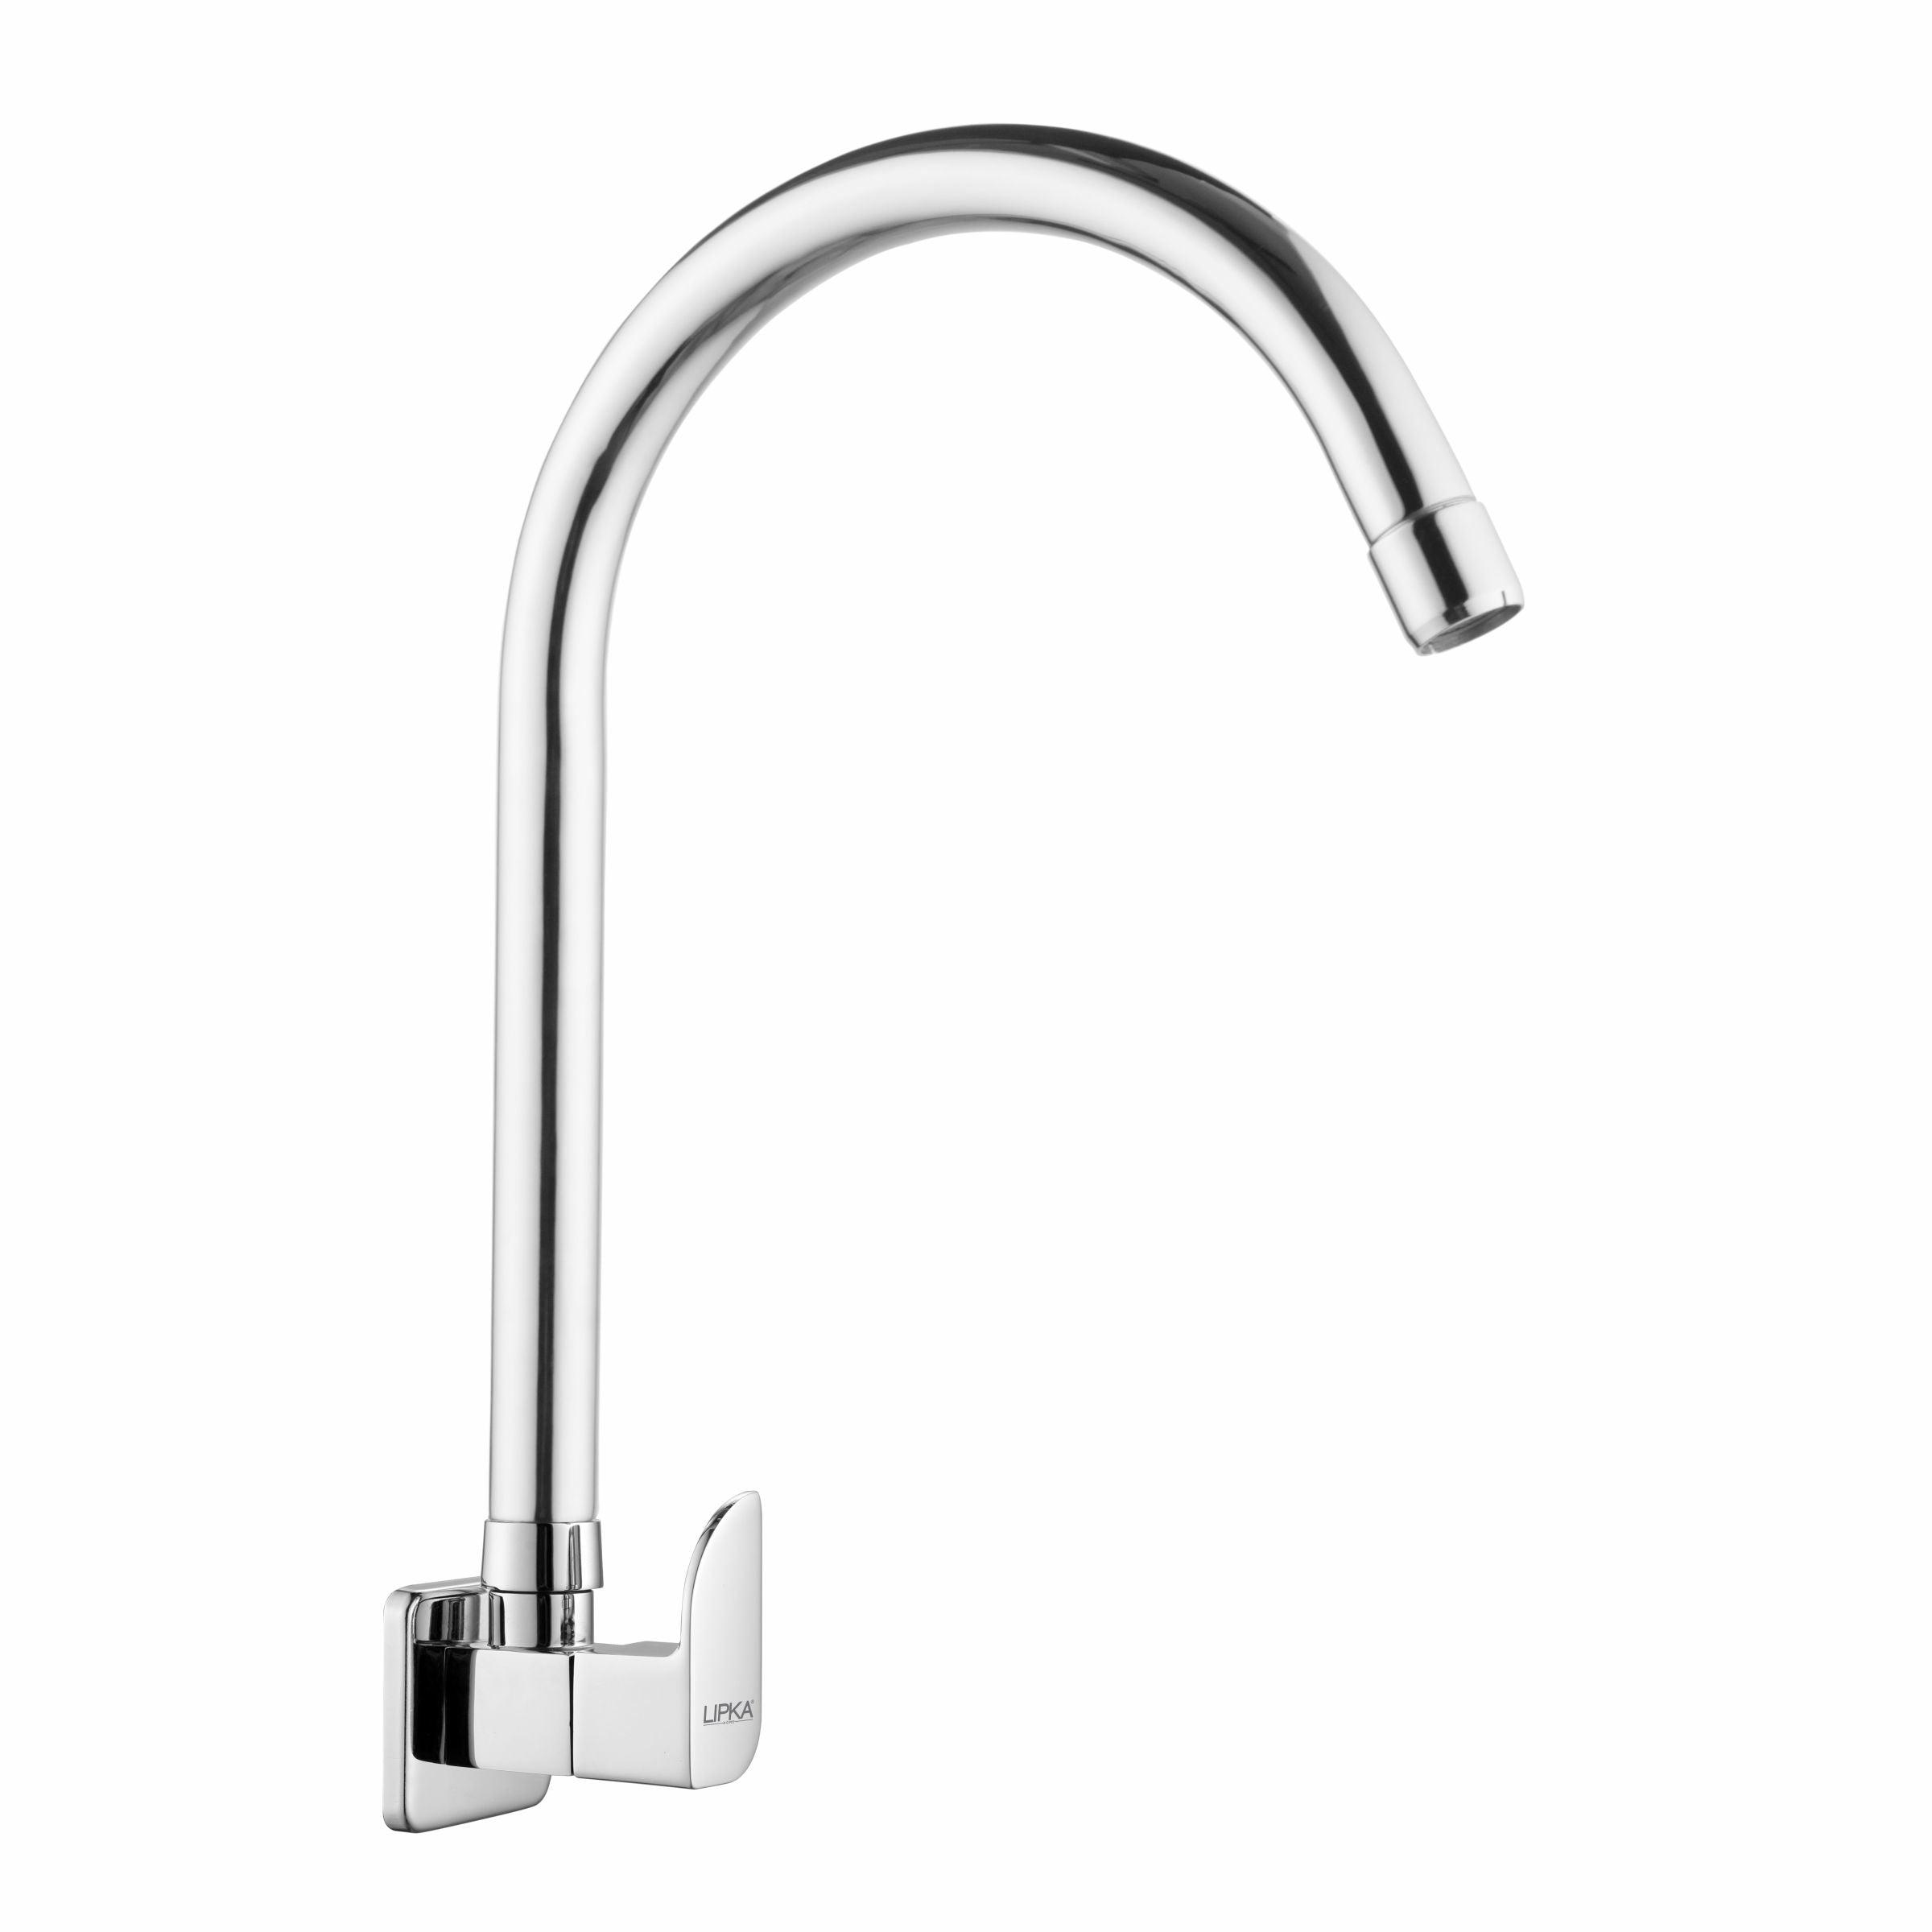 Arise Sink Tap Brass Faucet with Round Swivel Spout (20 Inches) - LIPKA - Lipka Home